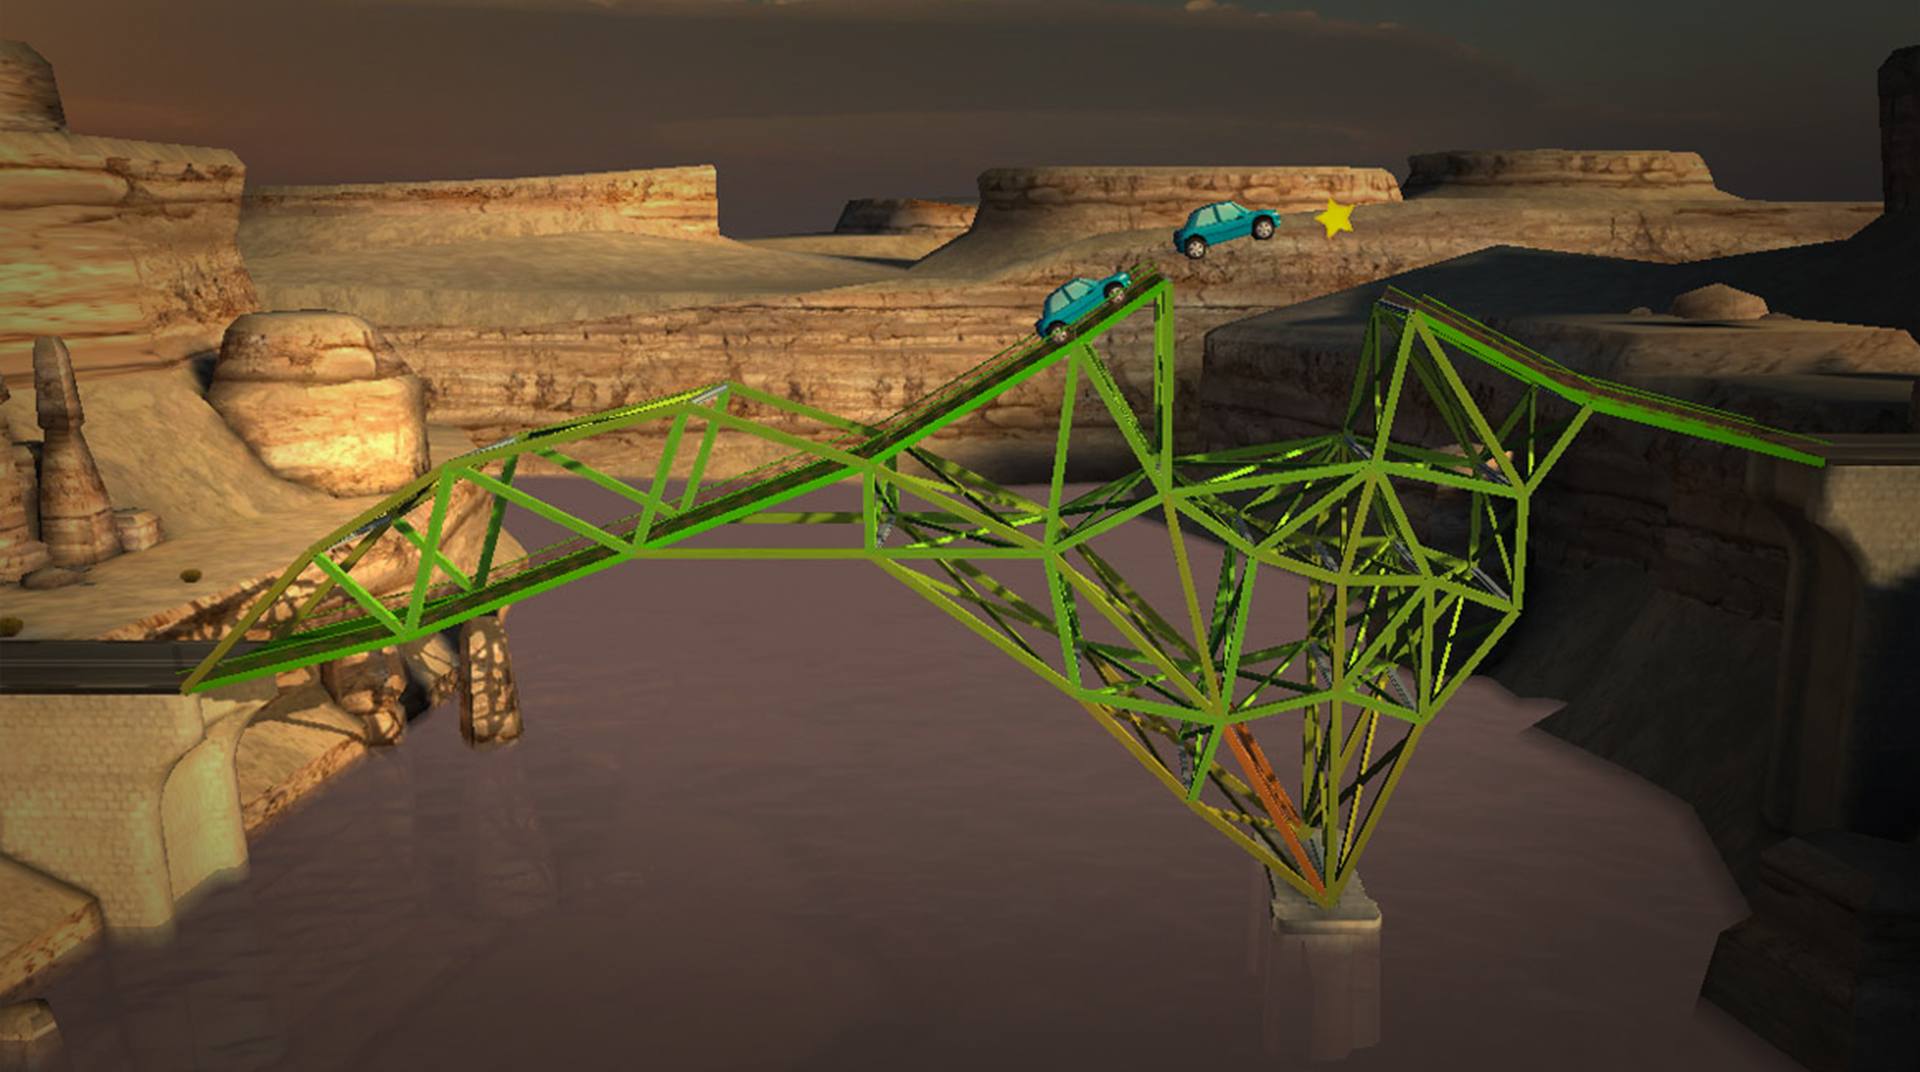 bridge constructor game download for pc